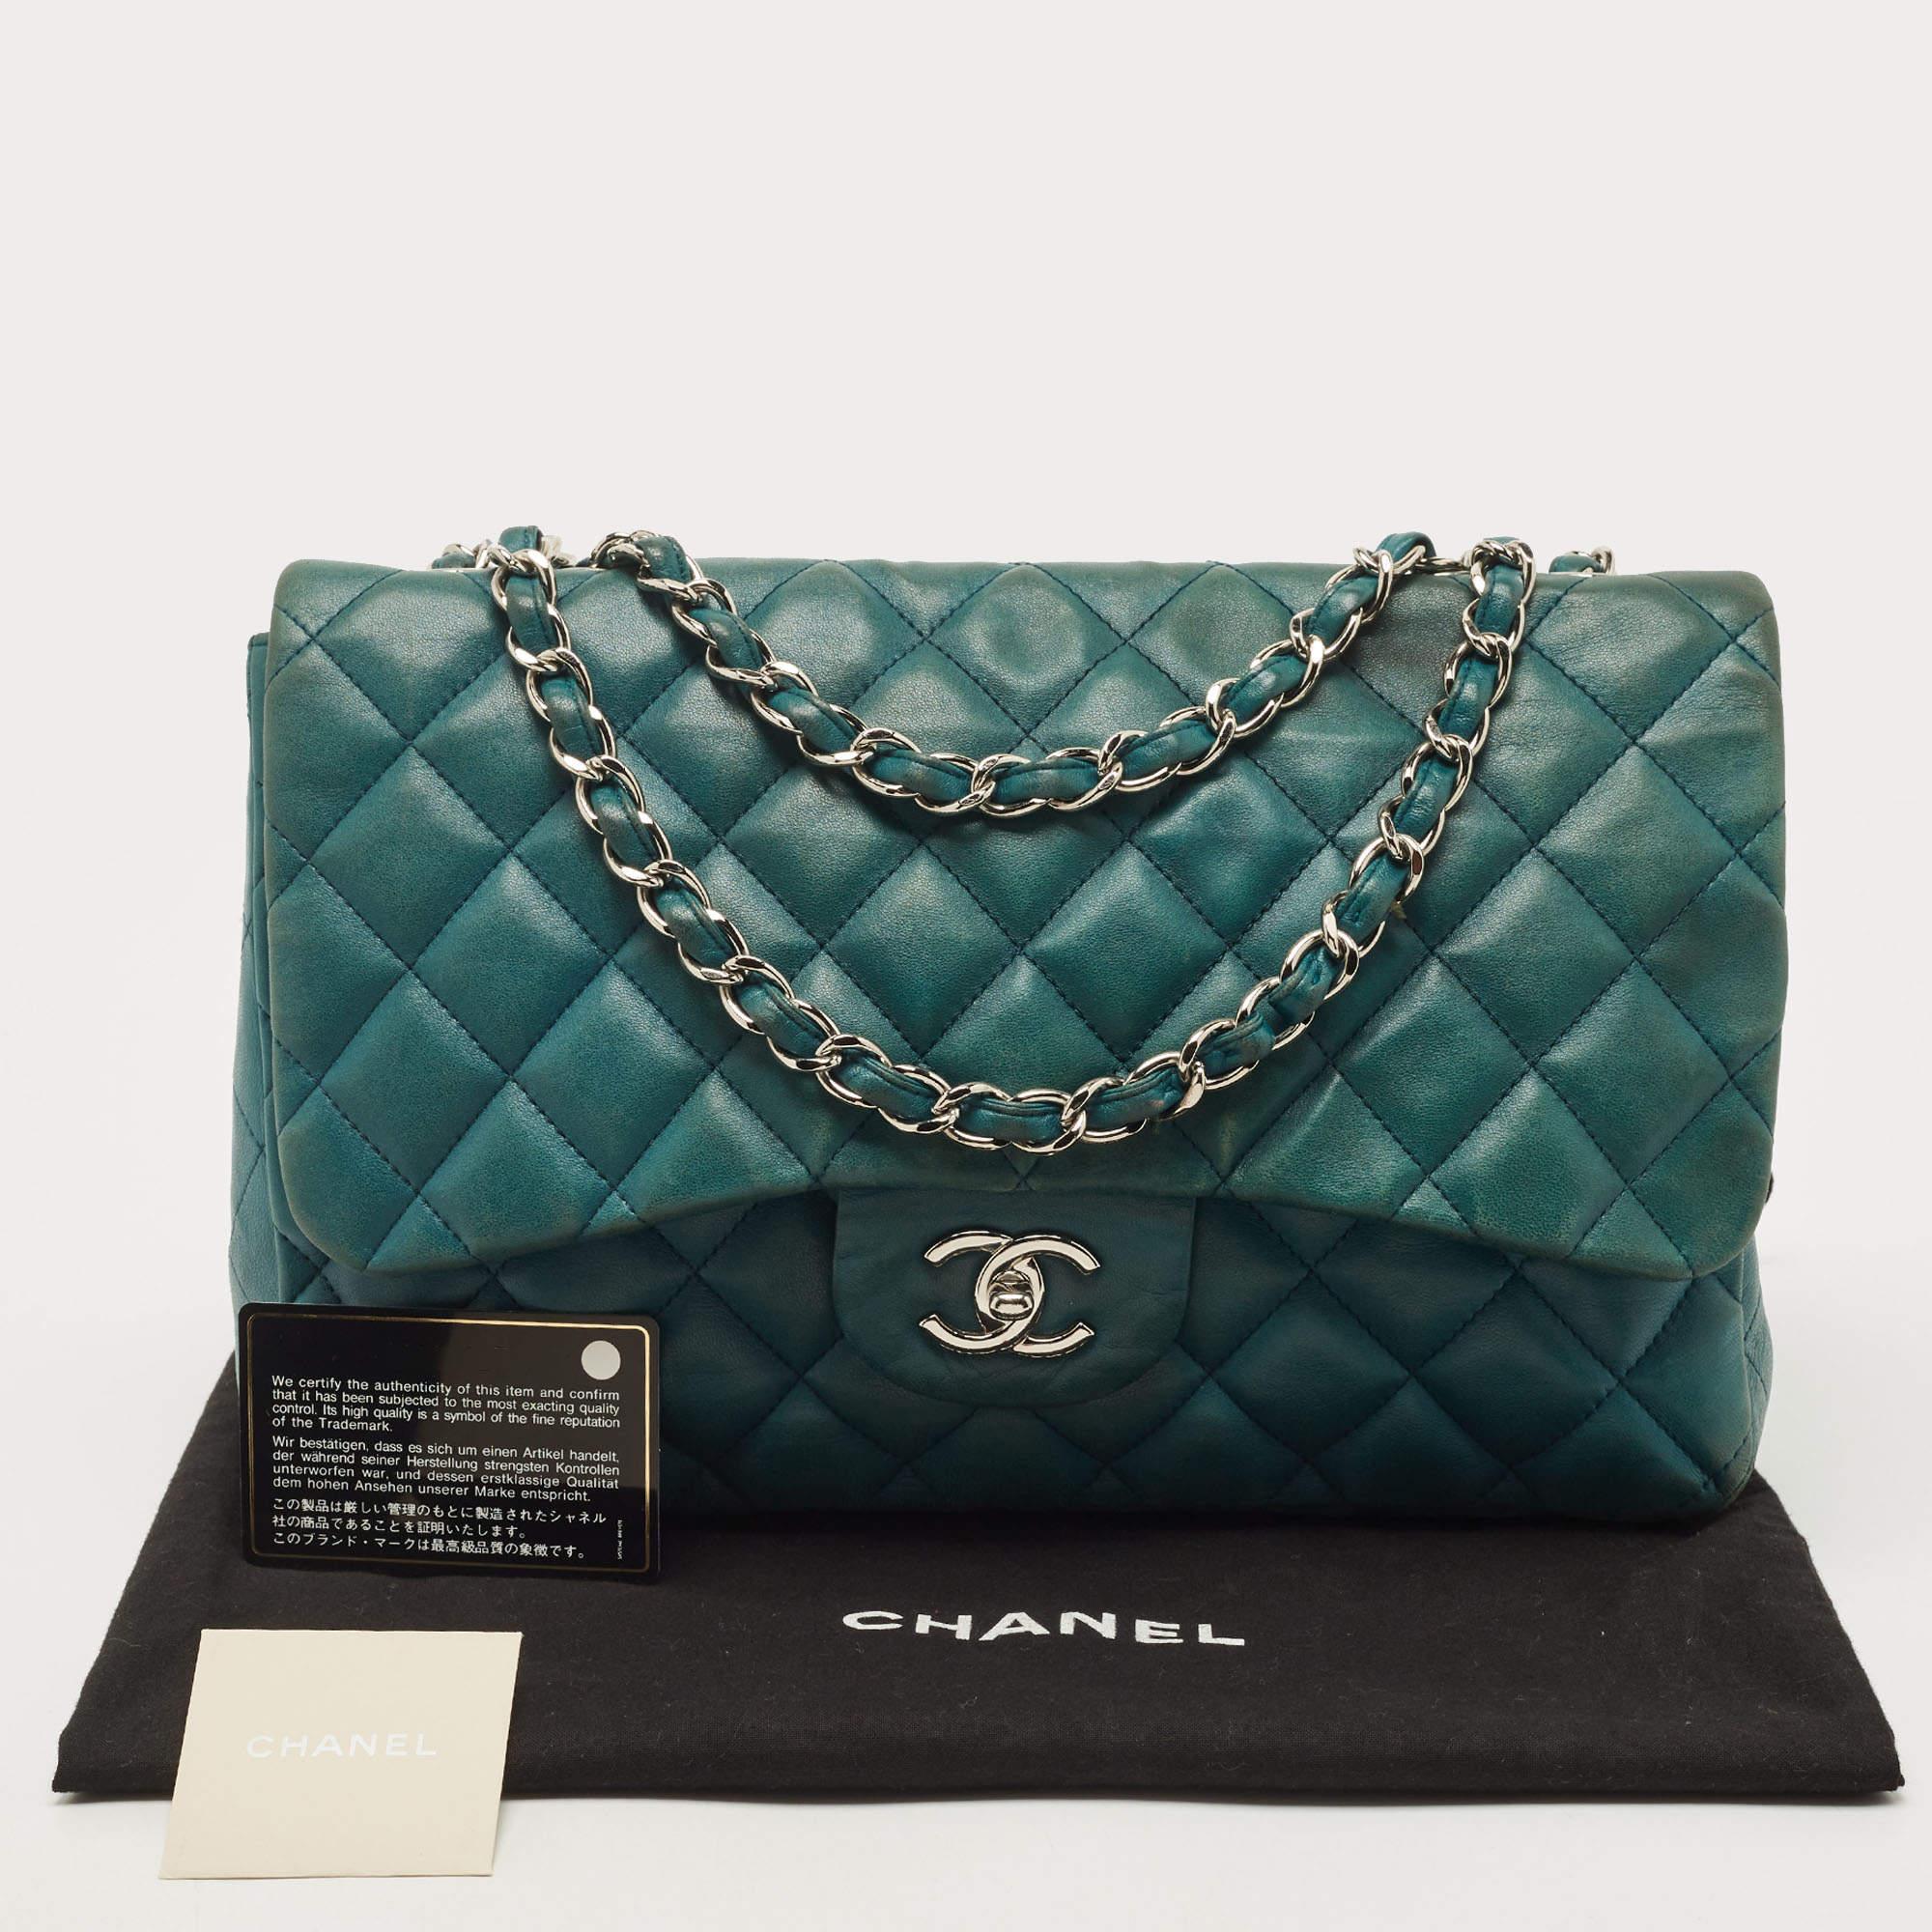 Chanel Teal Green Quilted Leather Jumbo Classic Single Flap Bag 12